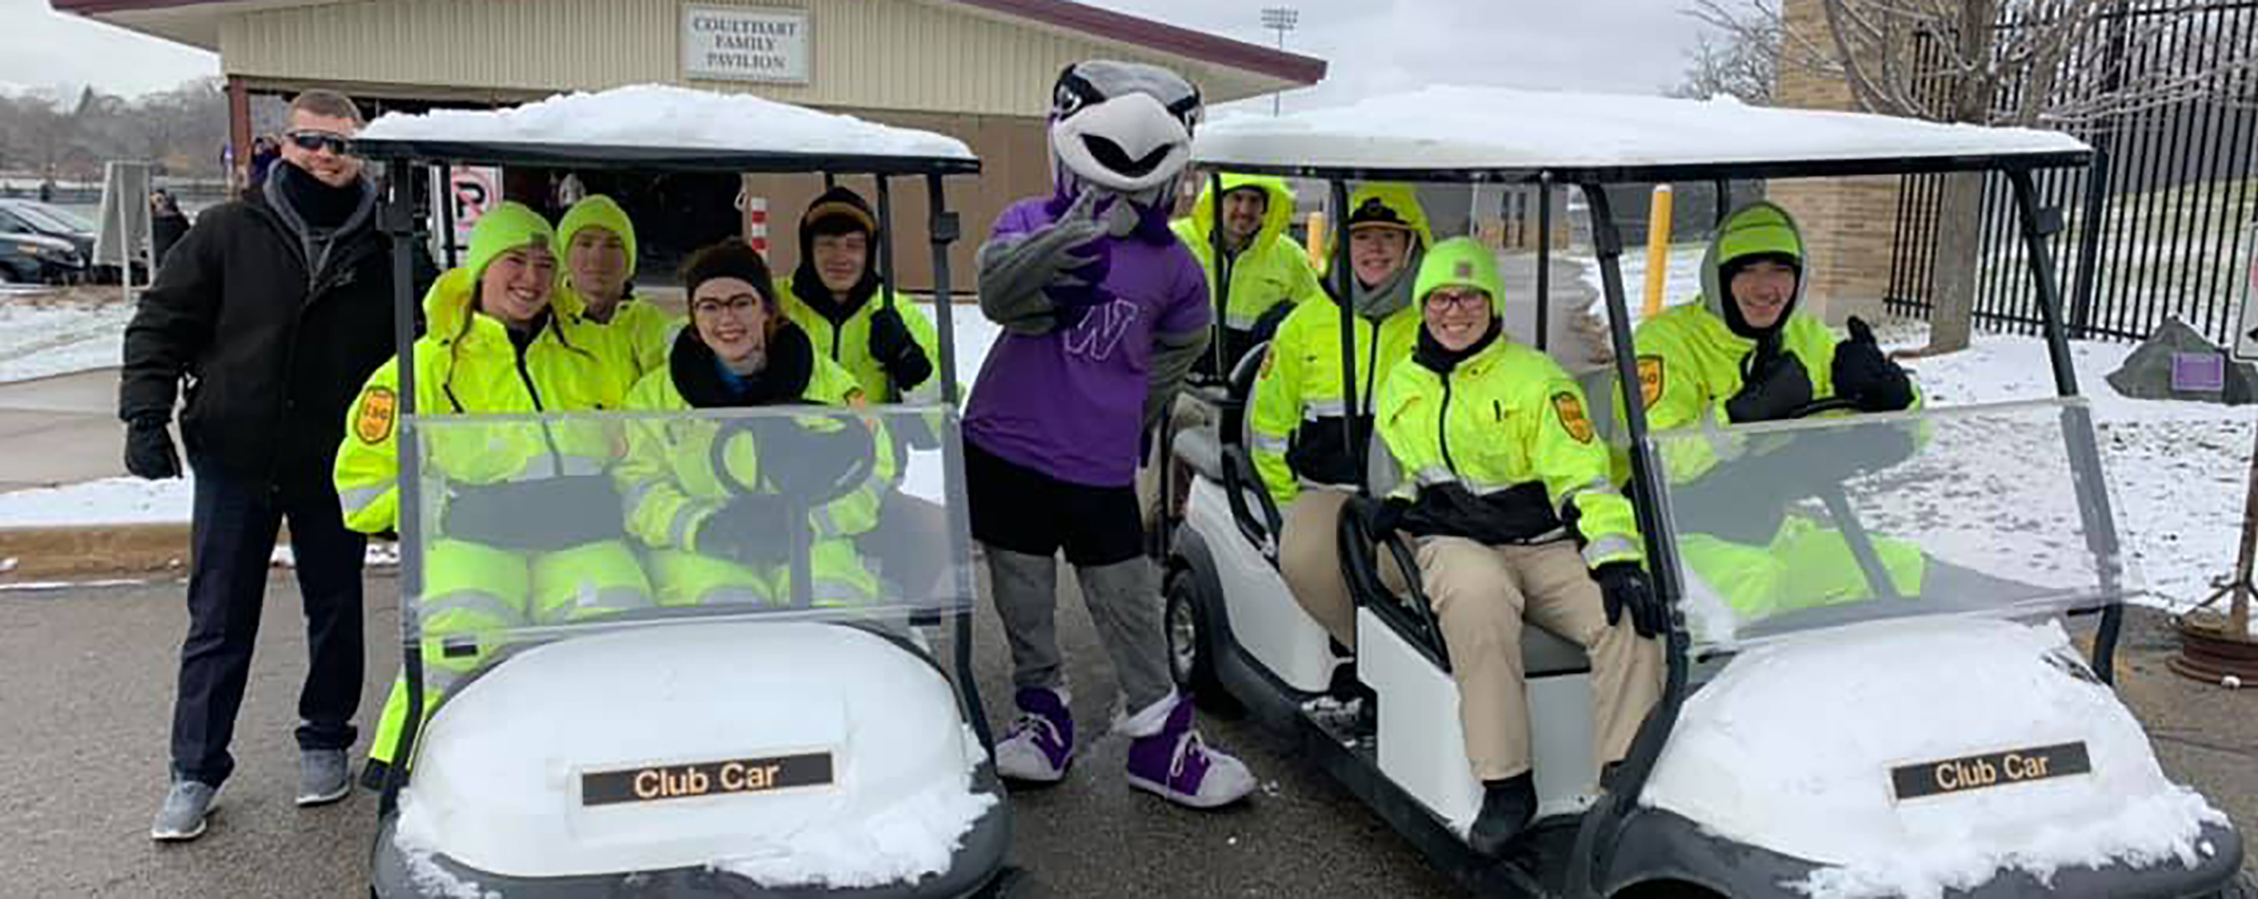 Campus Safety Officers at UW-Whitewater